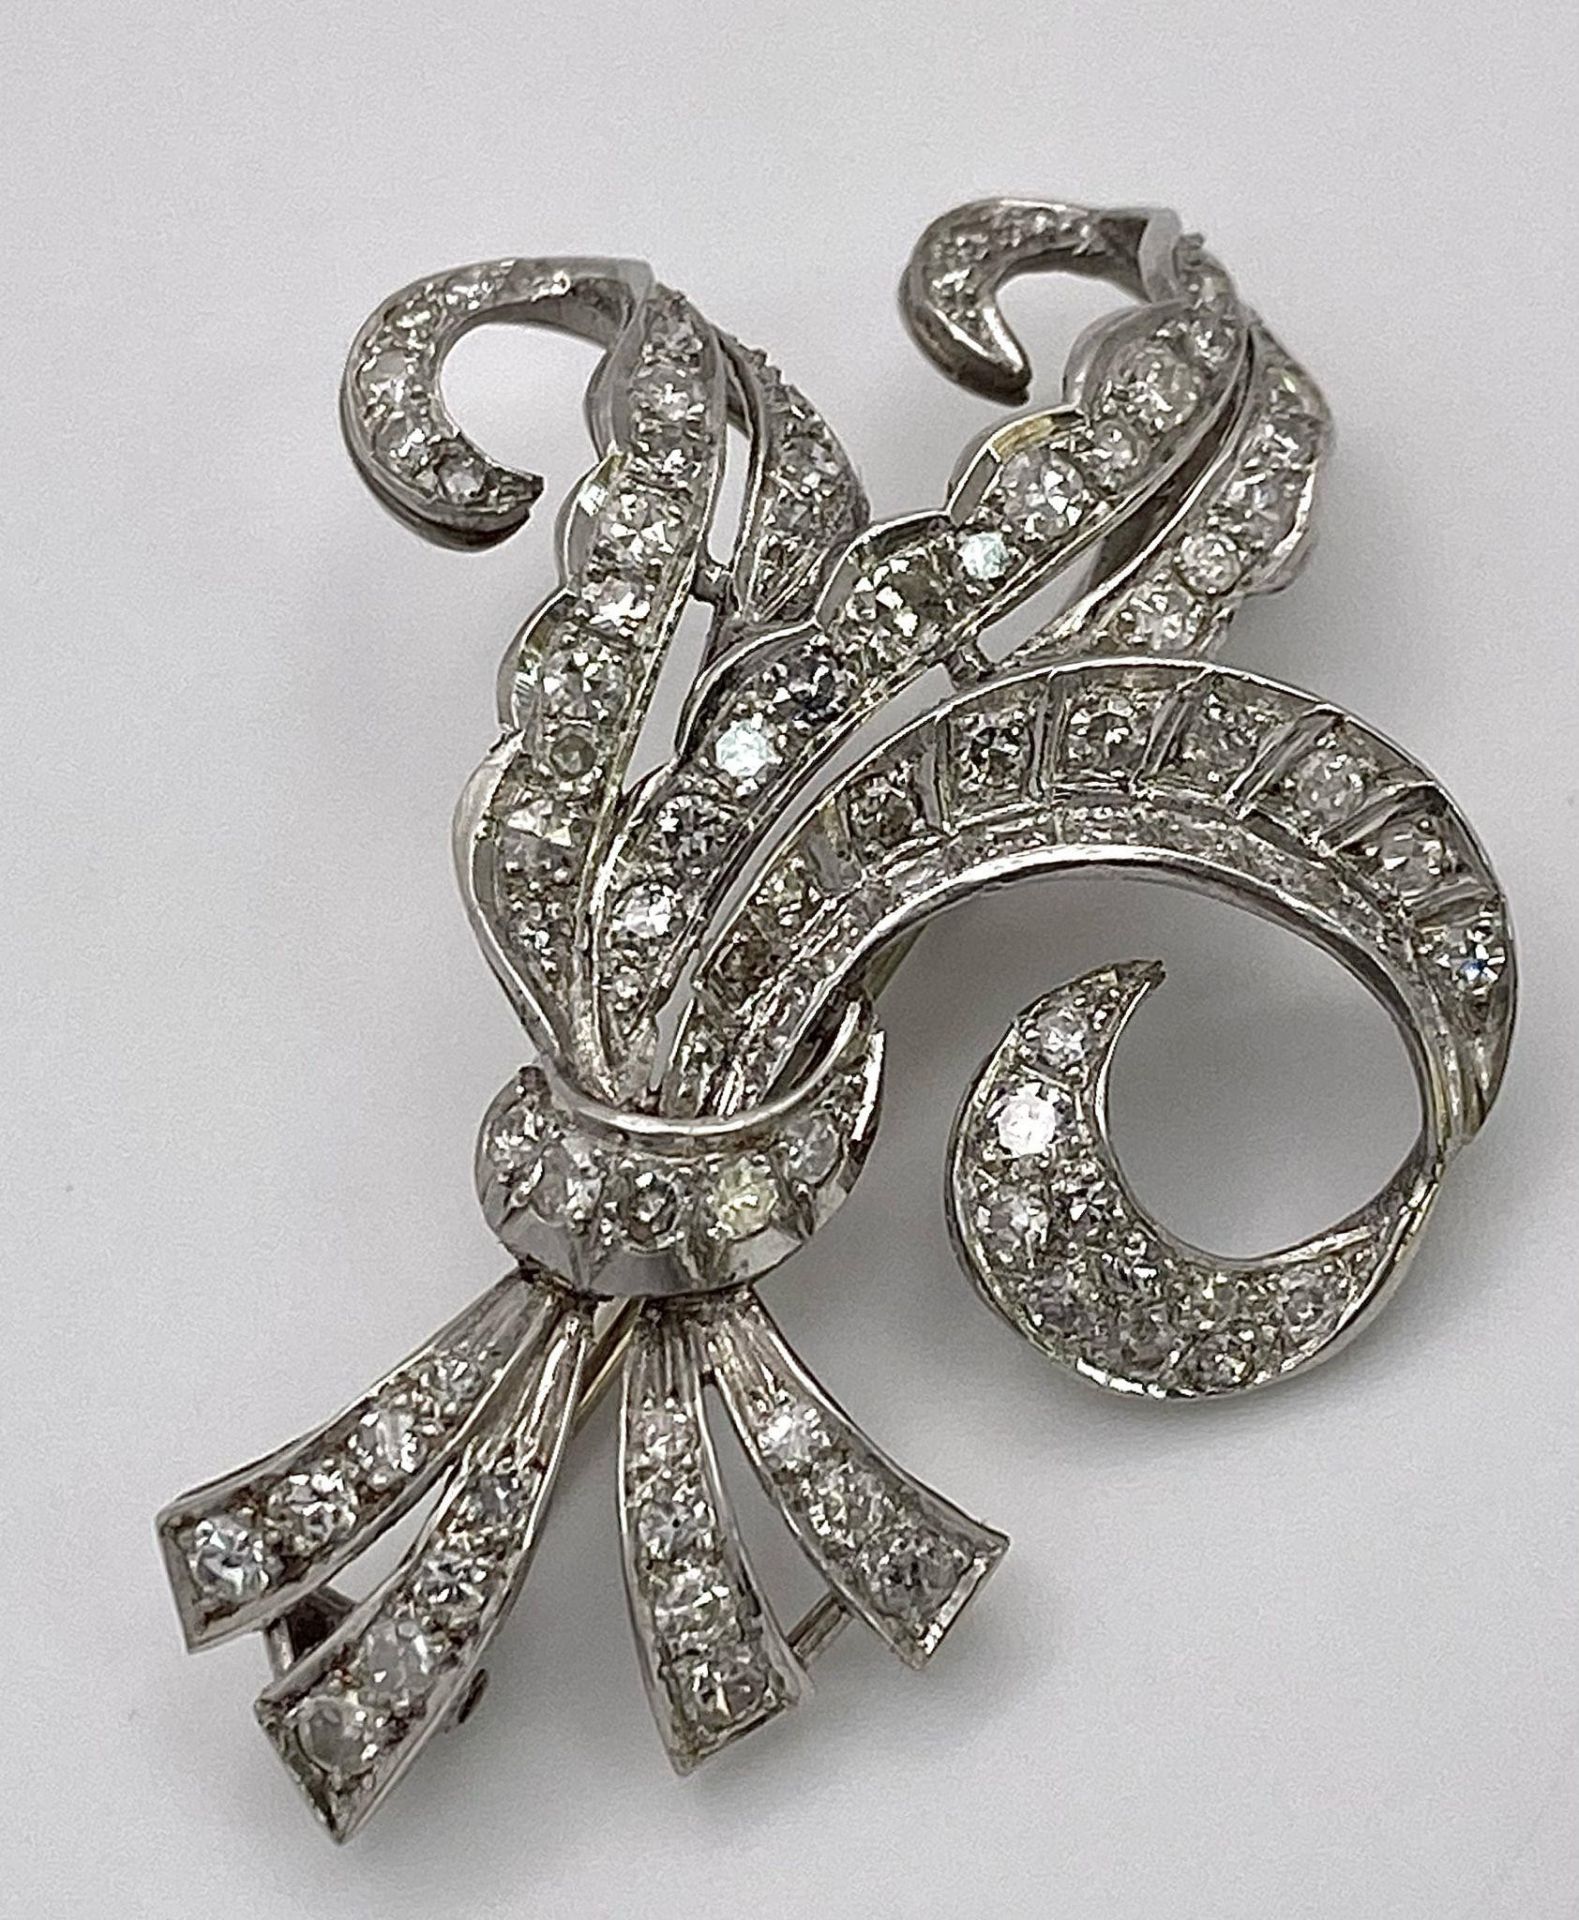 A Vintage Style Platinum and Diamond Elaborate Bow Brooch. 2.2ctw of encrusted diamonds. 10.7g total - Image 3 of 8